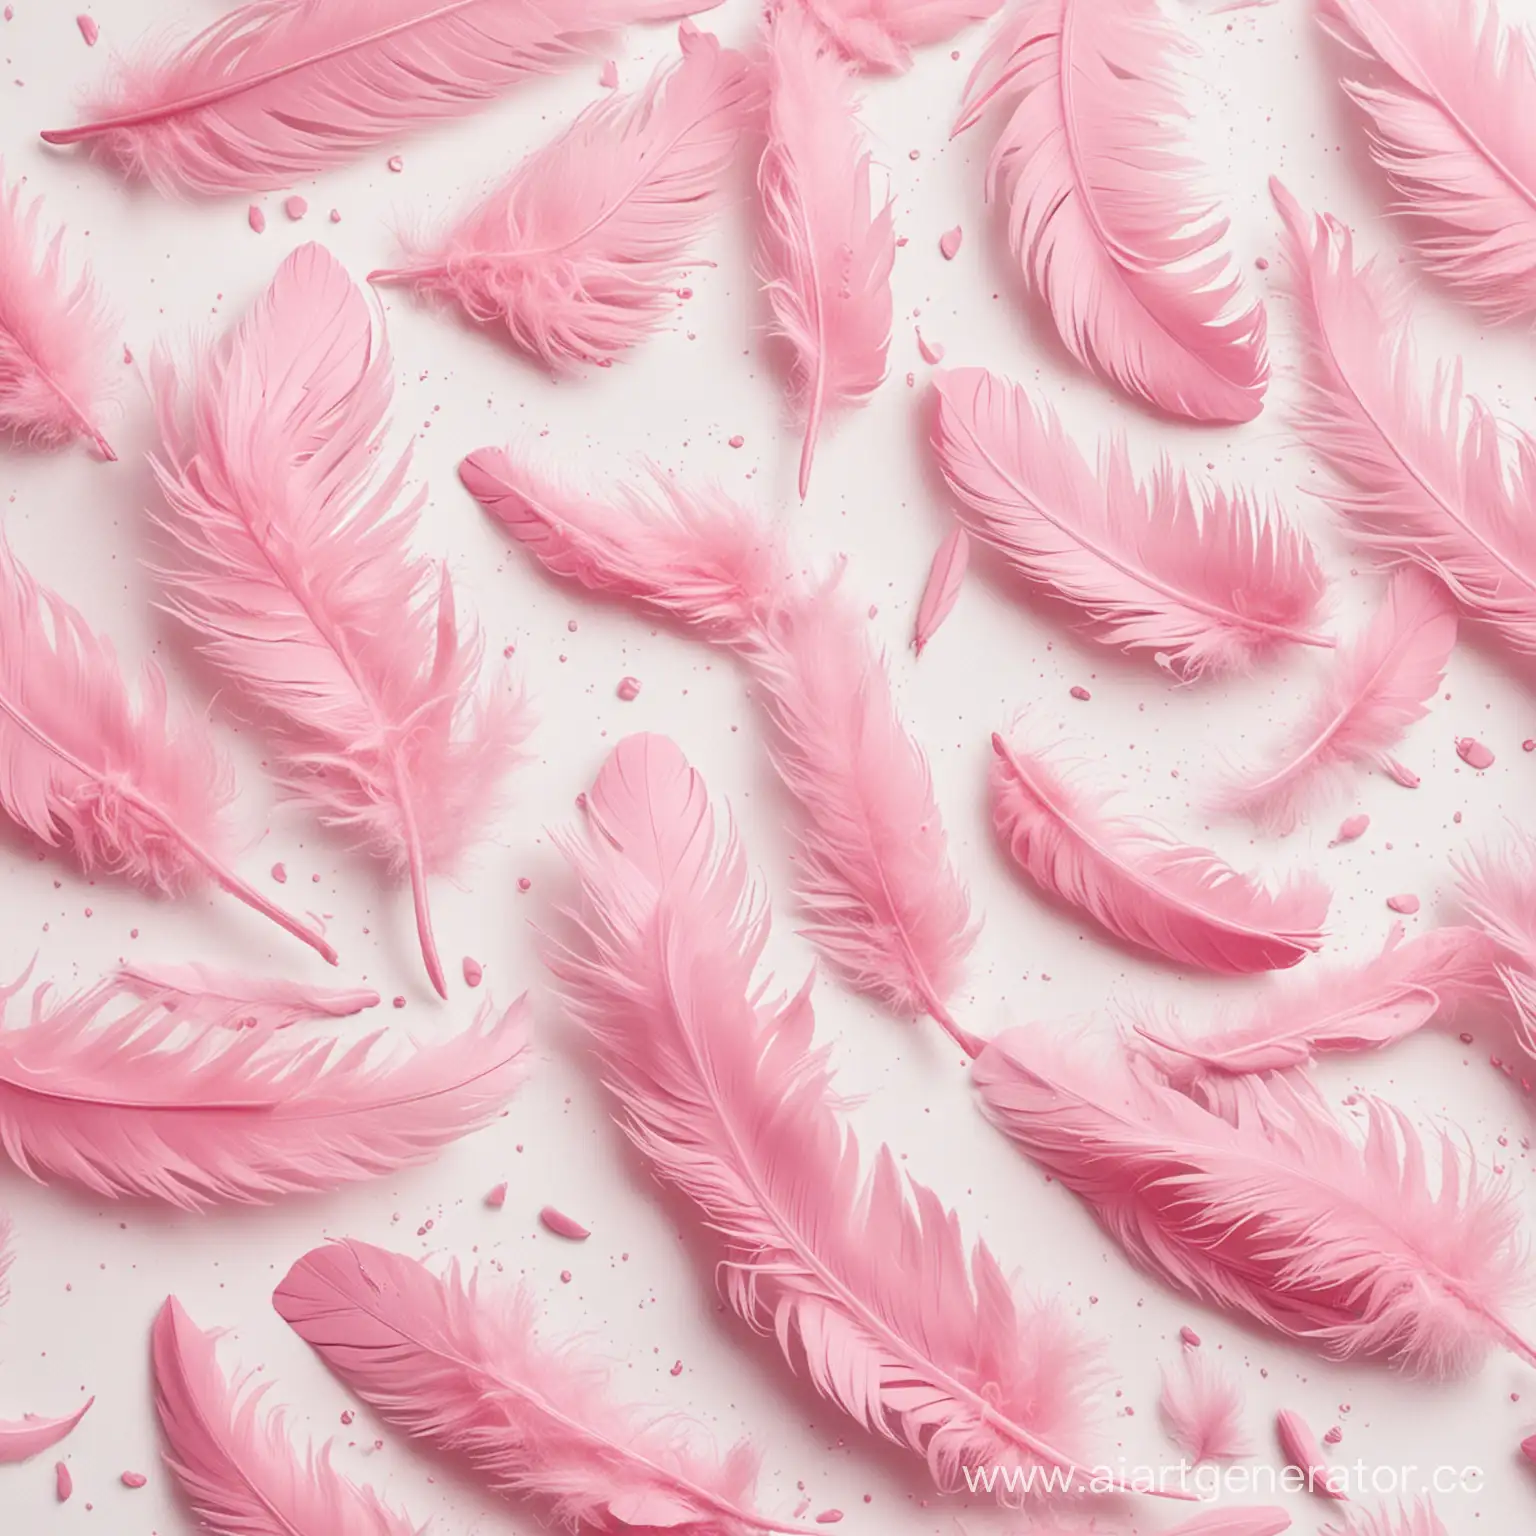 Ethereal-Pink-Feathers-Cascading-Against-a-Clean-White-Canvas